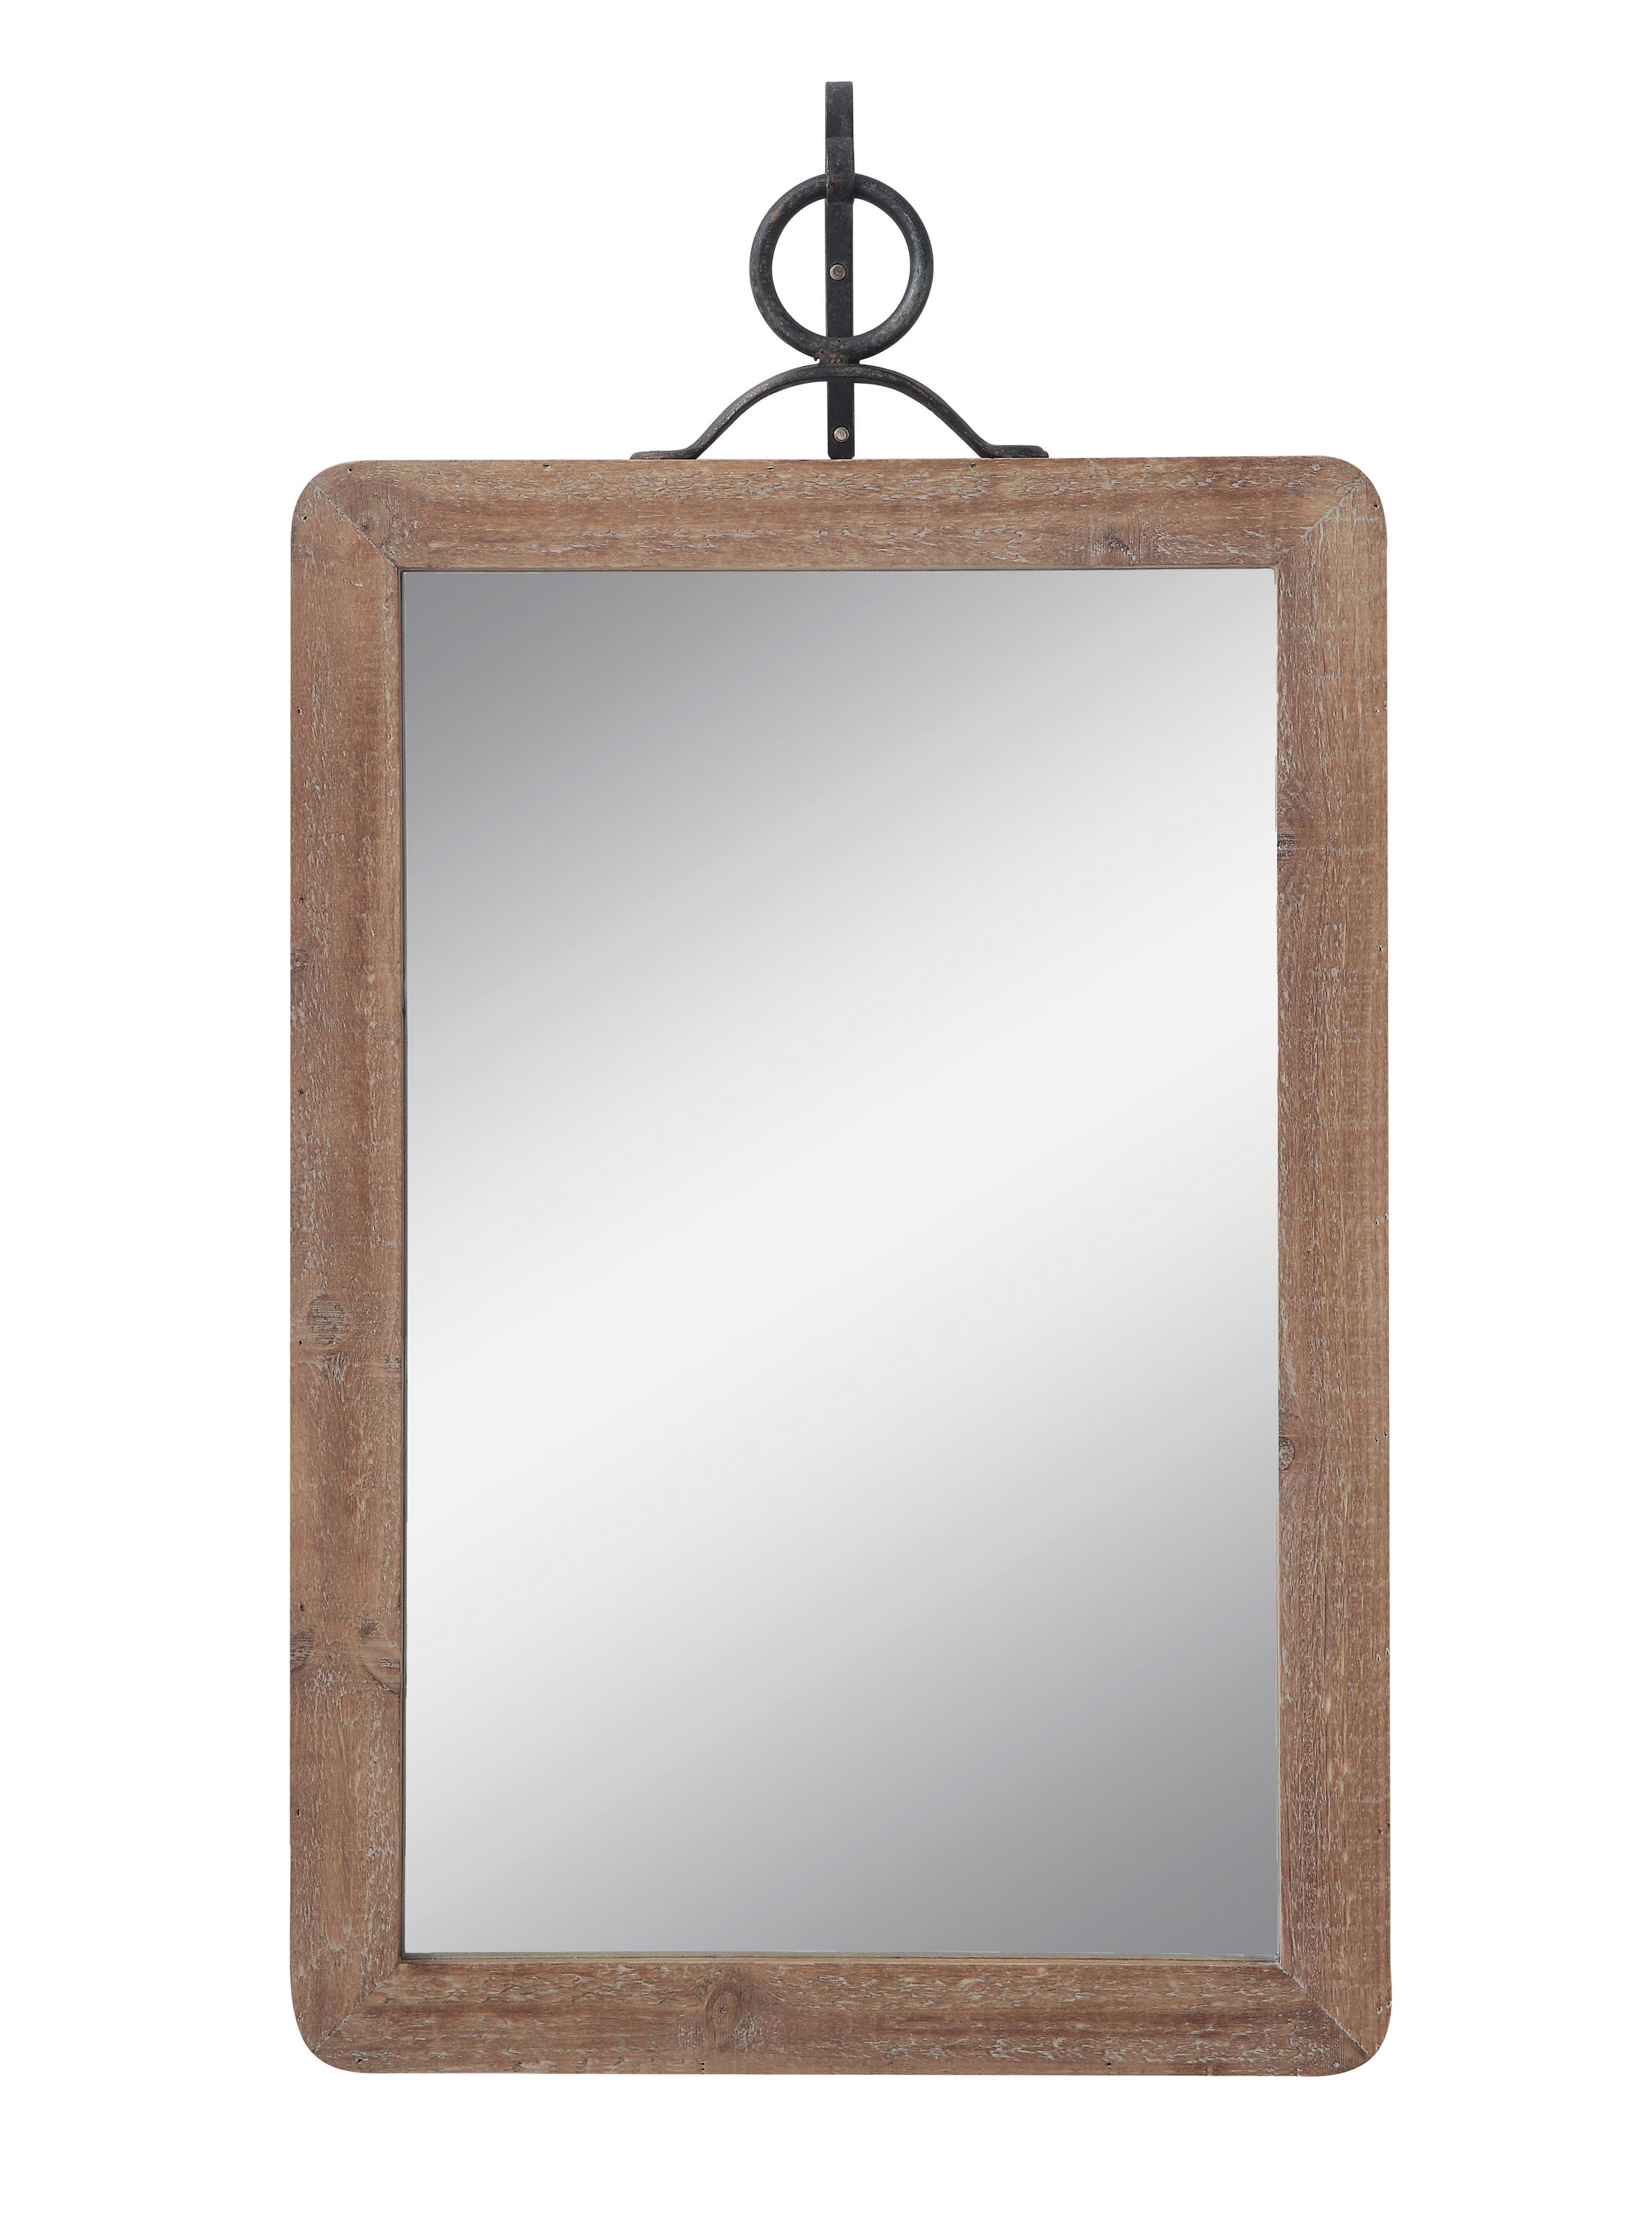 Large Wood Framed Rectangle Wall Mirror with Black Metal Hanging Bracket (Set of 2 Pieces) - Image 0